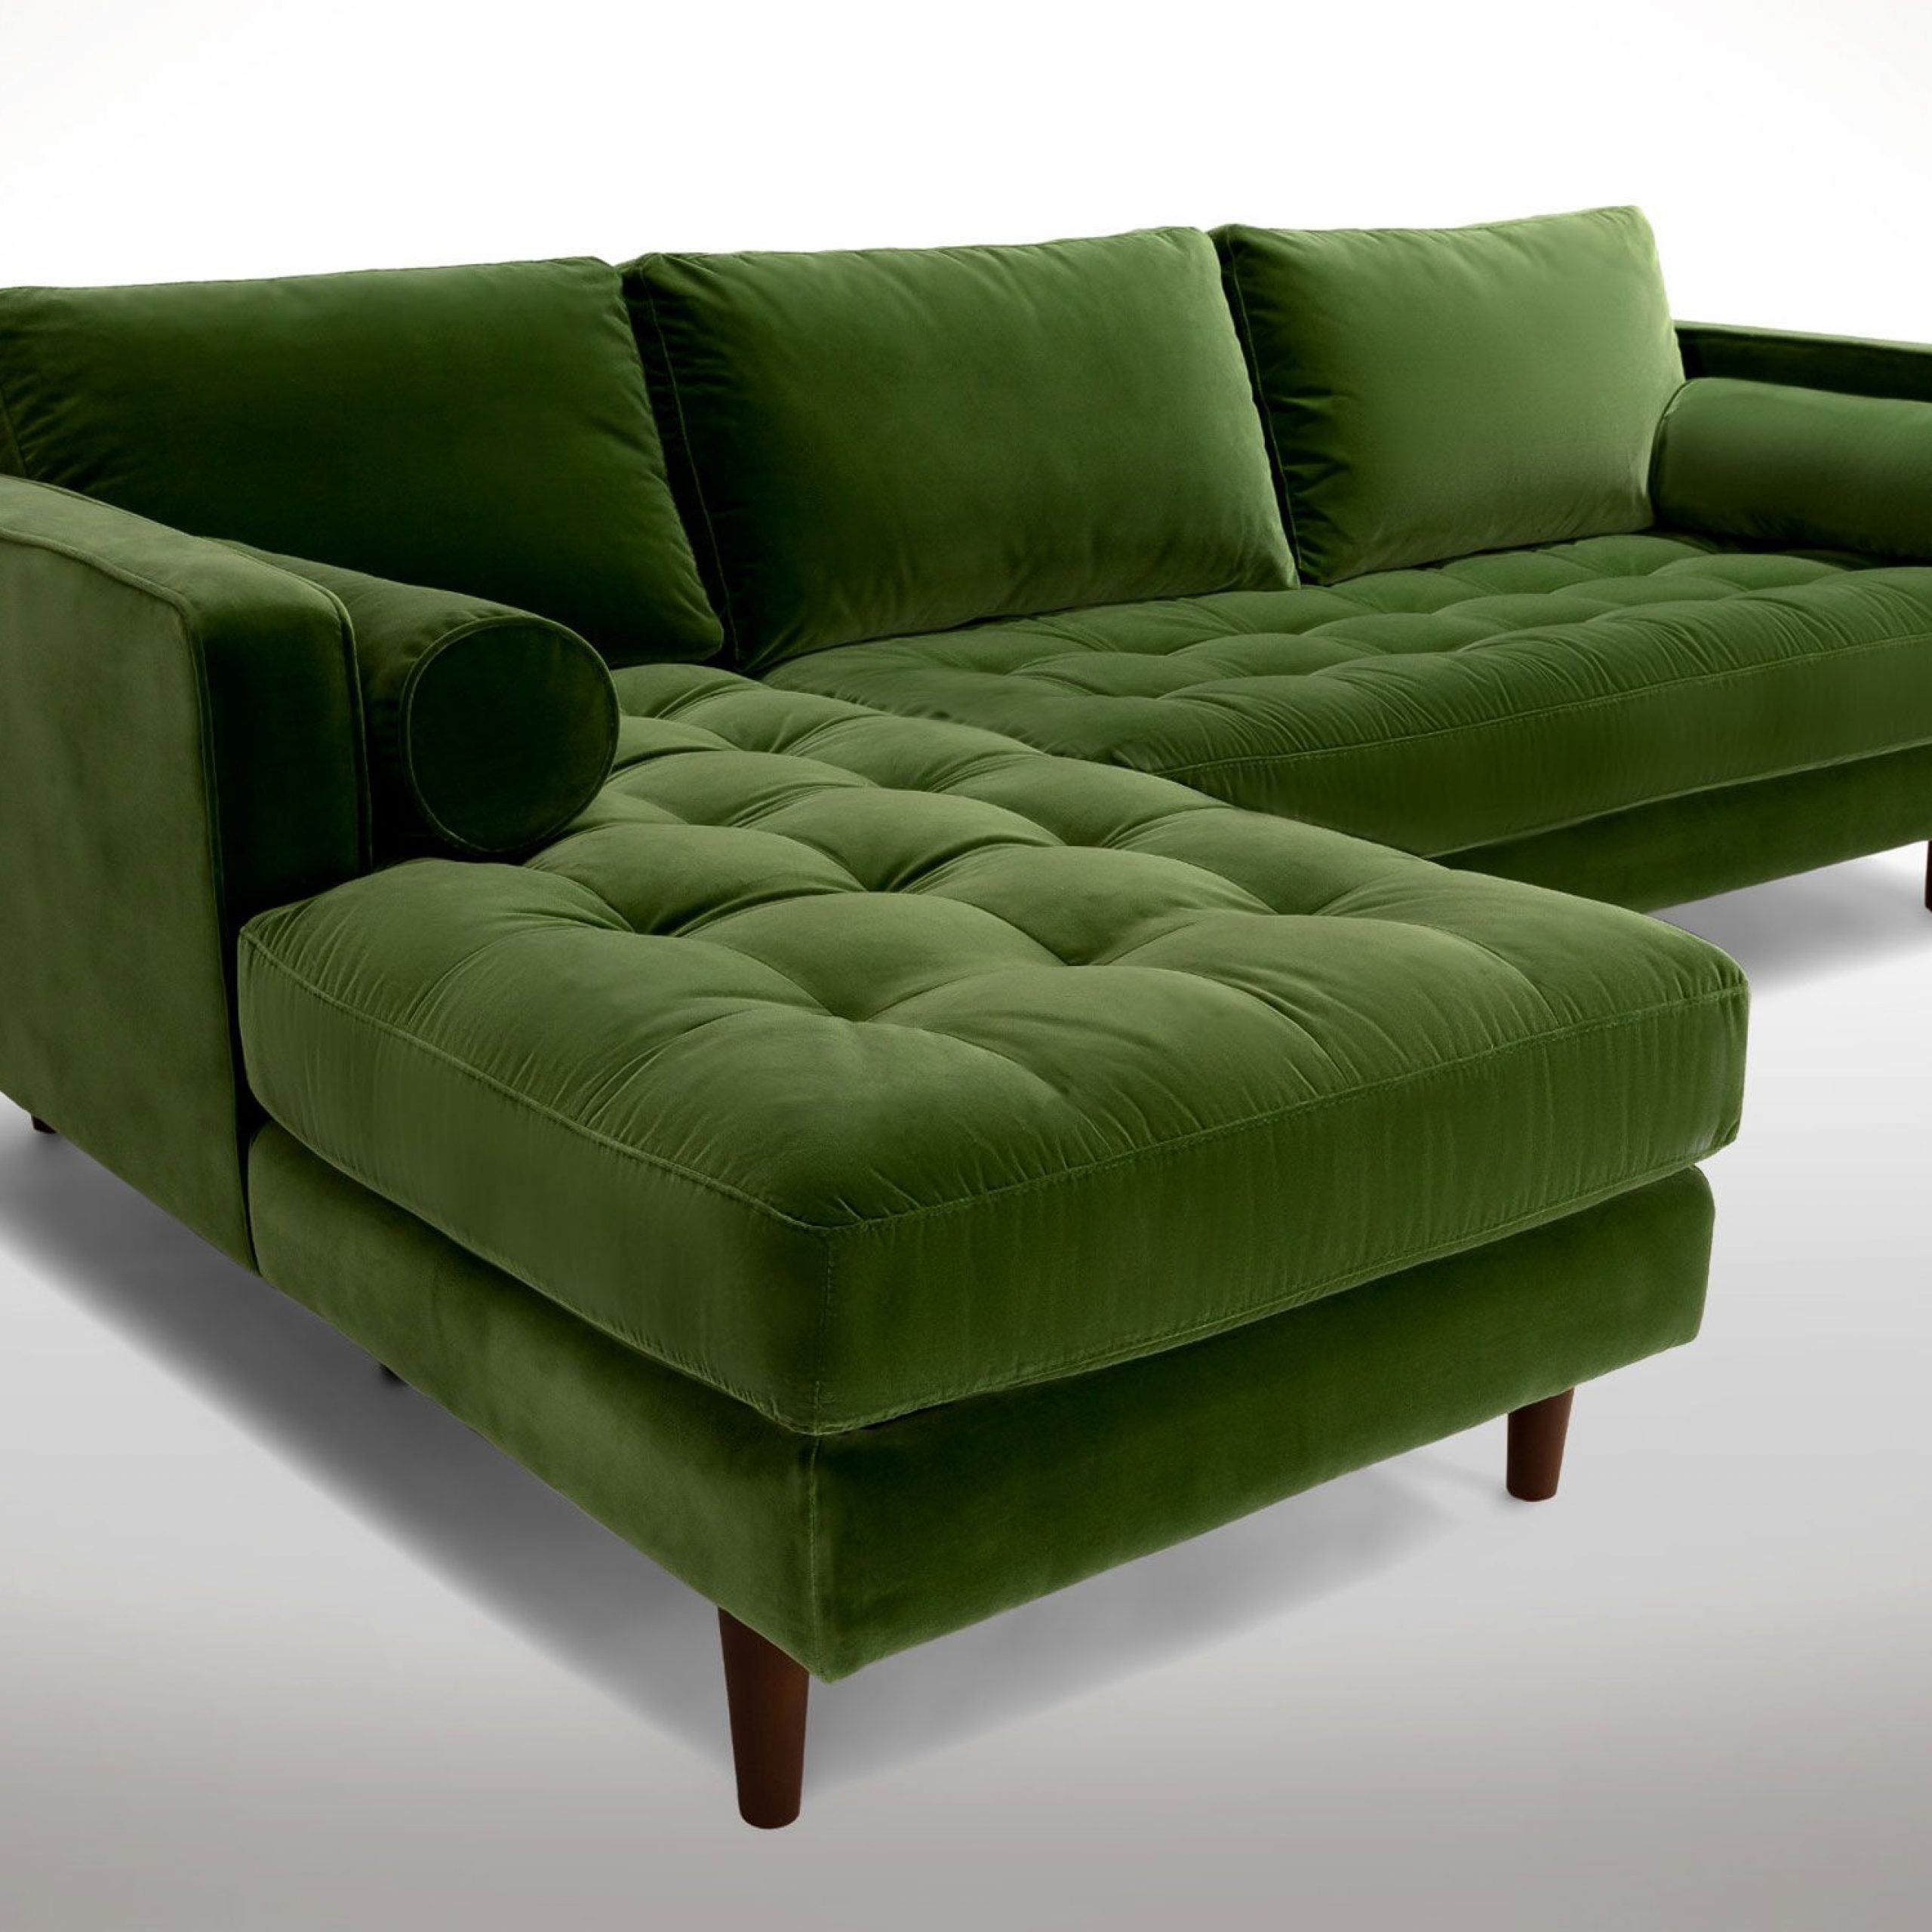 Sven Grass Green Left Sectional Sofa | Sectional Sofa Regarding Dulce Mid Century Chaise Sofas Dark Blue (View 15 of 15)